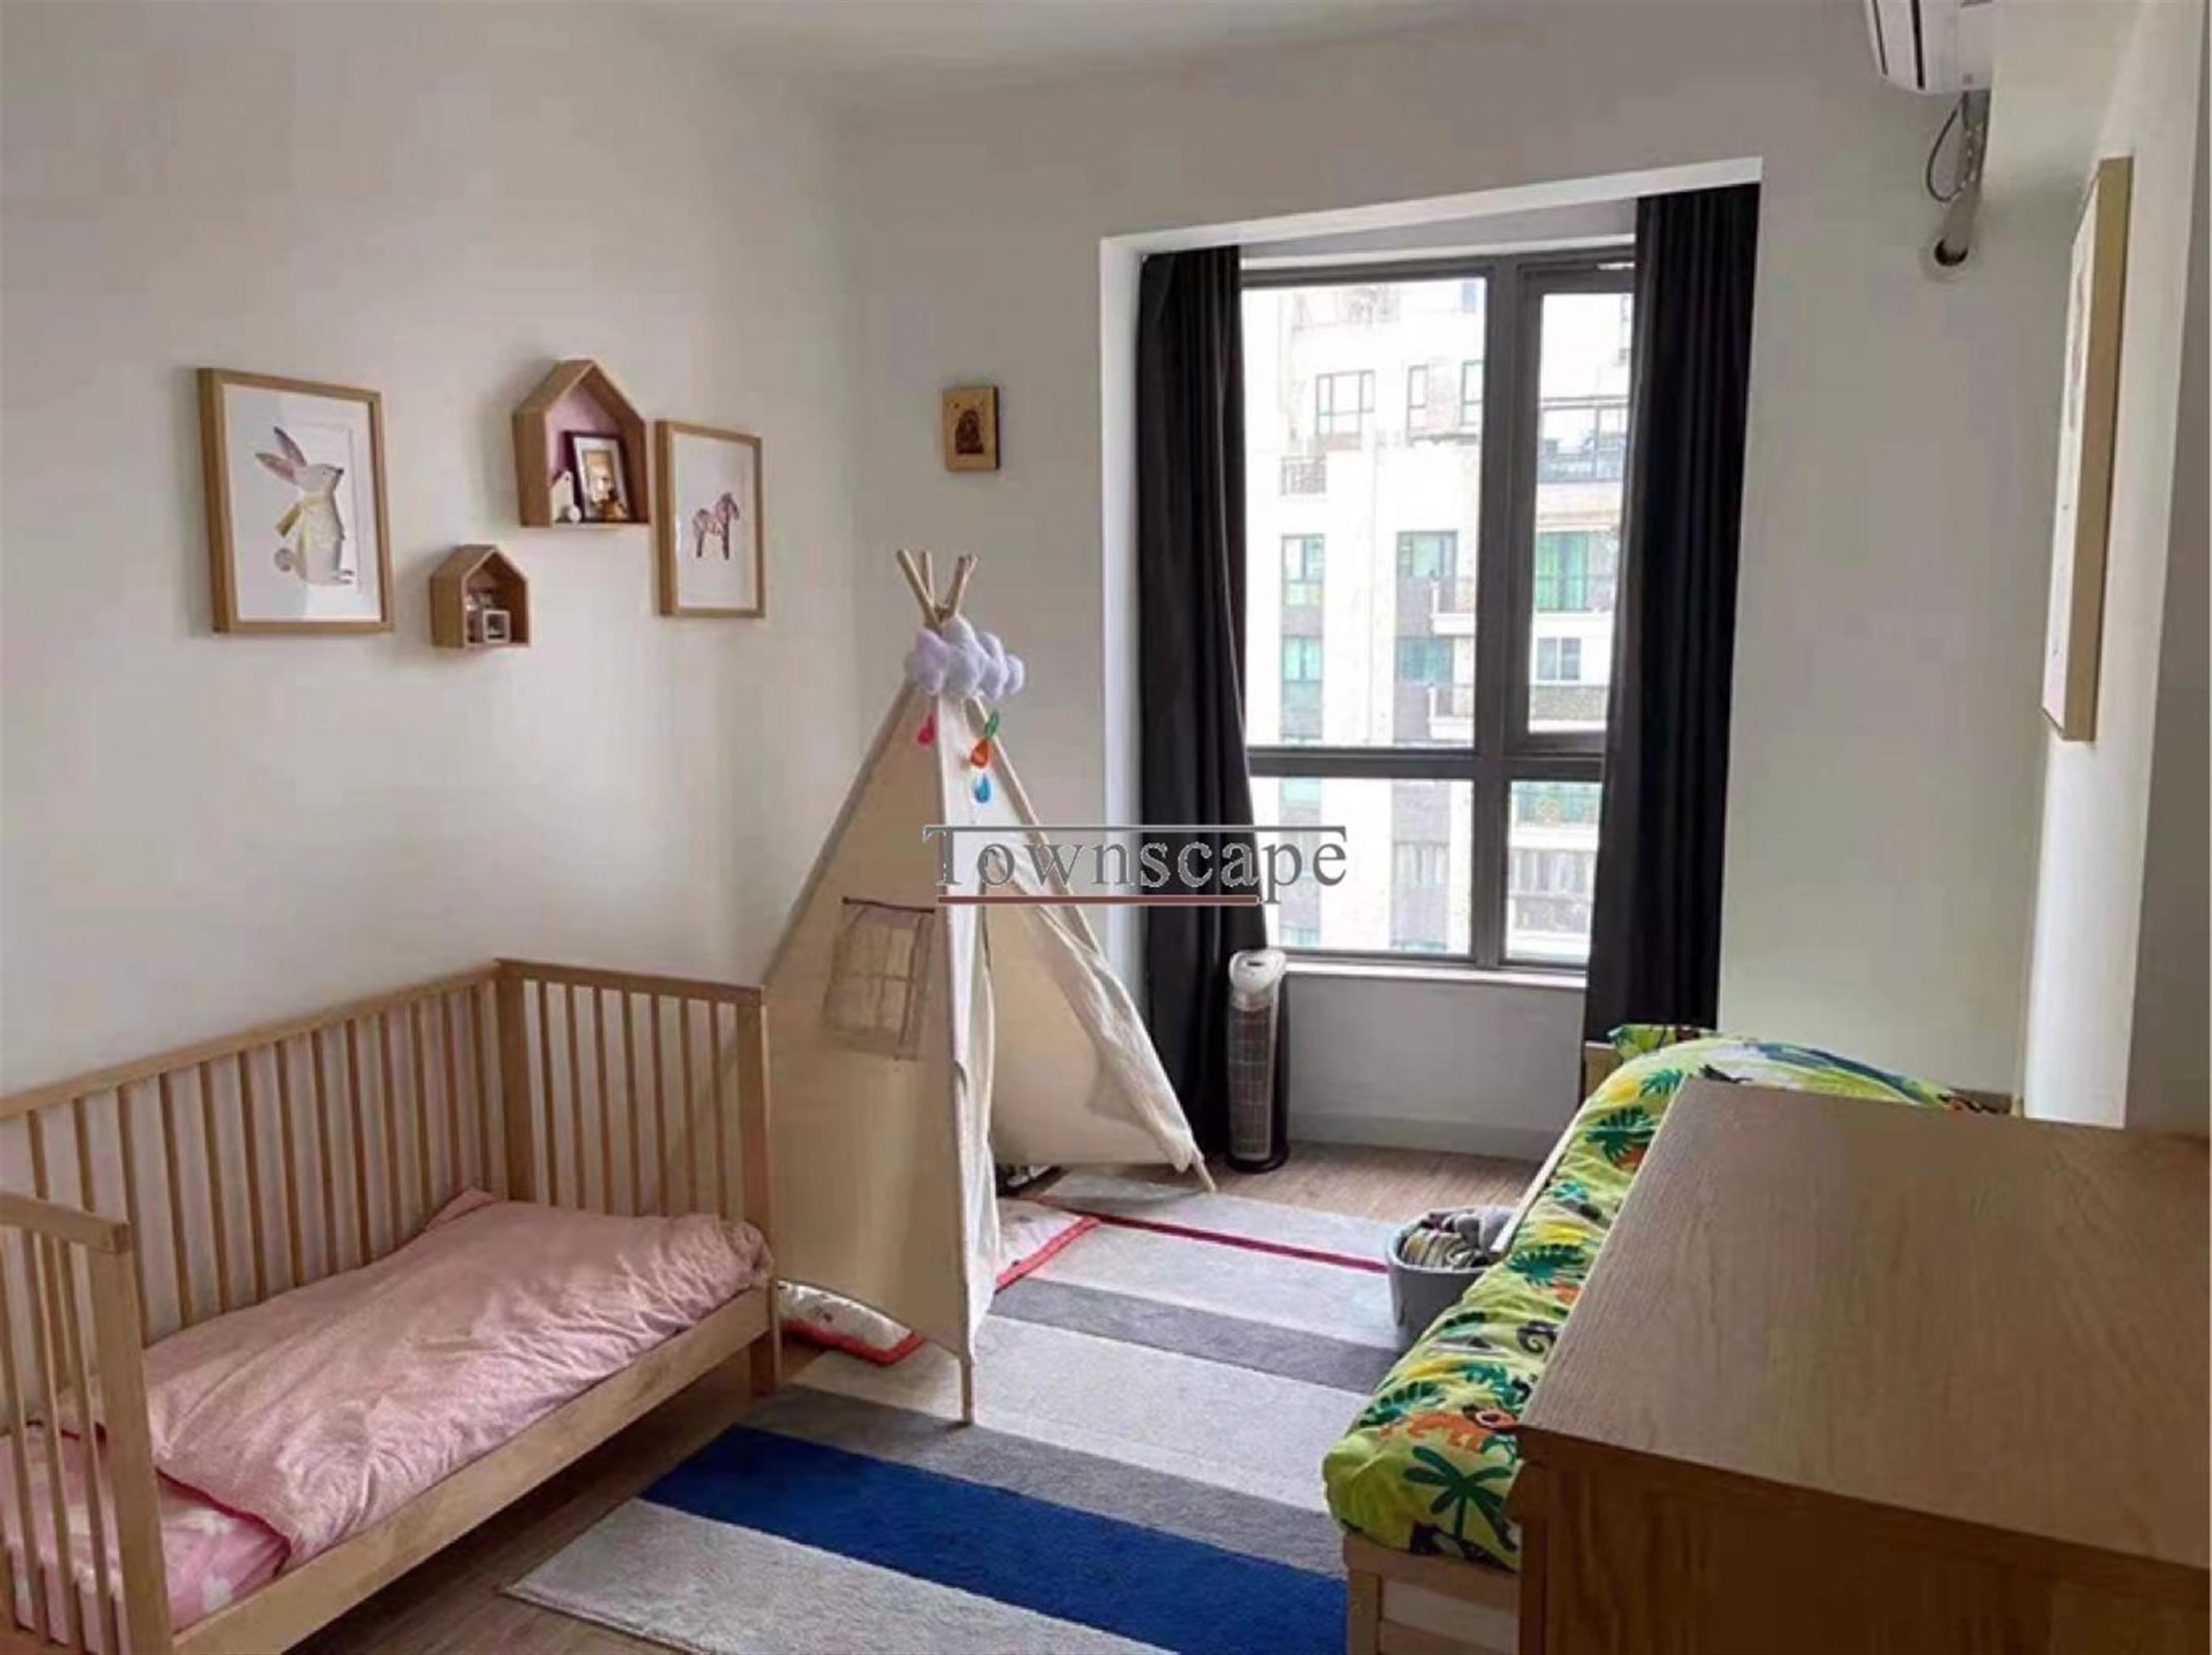 Kid`s room Fabulous Spacious Le Cite 3BR Apt in the Clouds Nr LN 1/9/11 for Rent in Shanghai’s Xujiahui